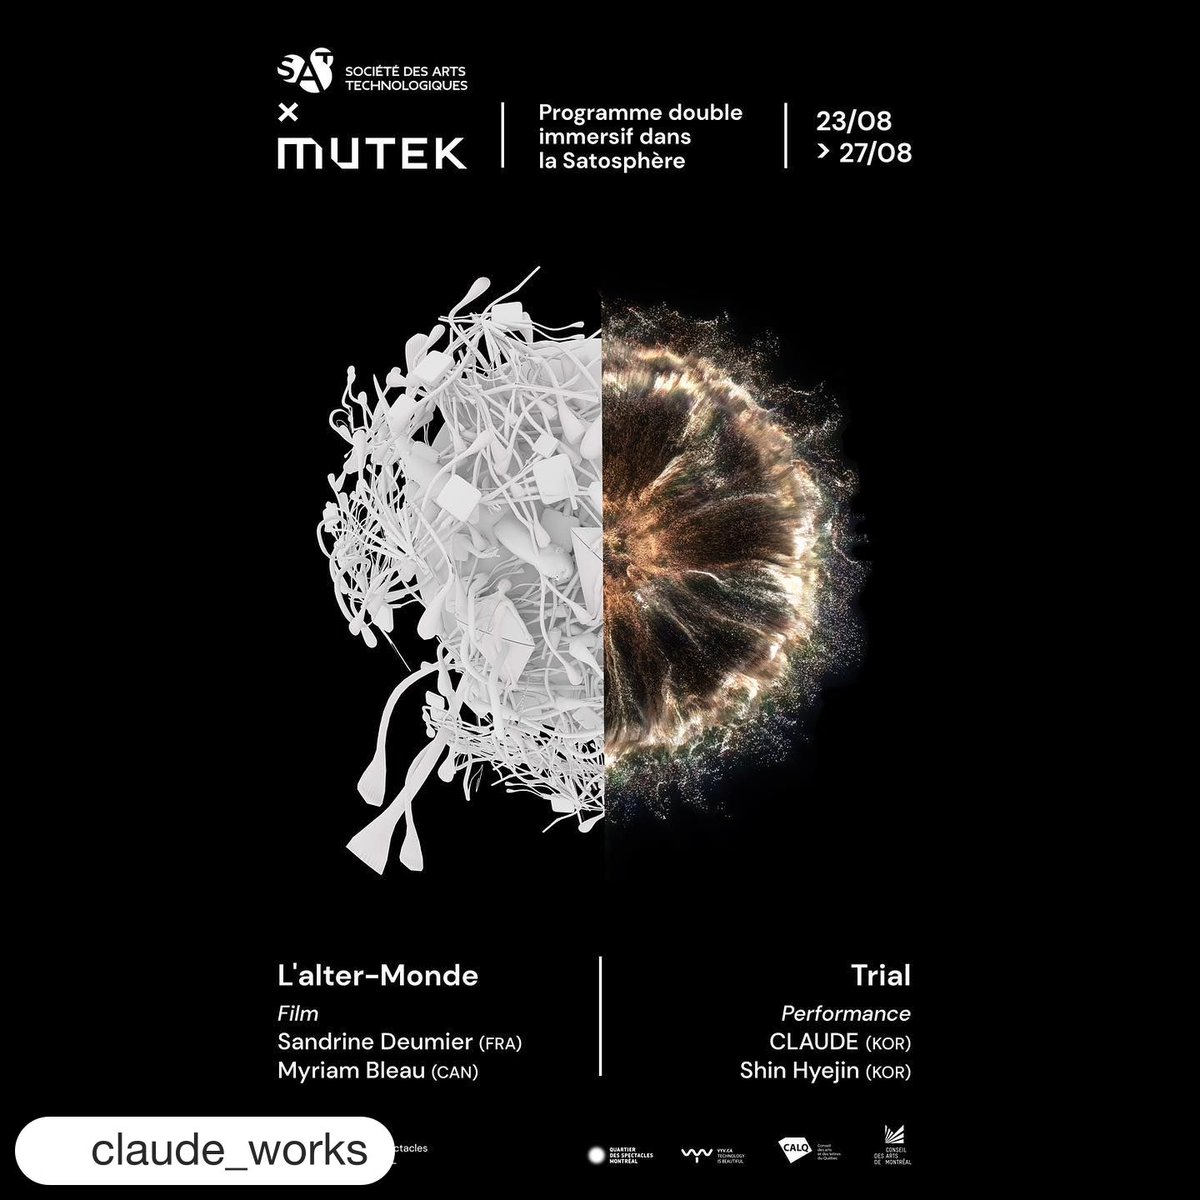 #Repost @claude_works
・・・
@hyejin_shin and I will presenting a new Audio Visual work <Trial> as part of SAT_Montreal X @MUTEK_Montreal program.

#satmontreal #satosphère #mutek #mutekmontreal #audiovisual